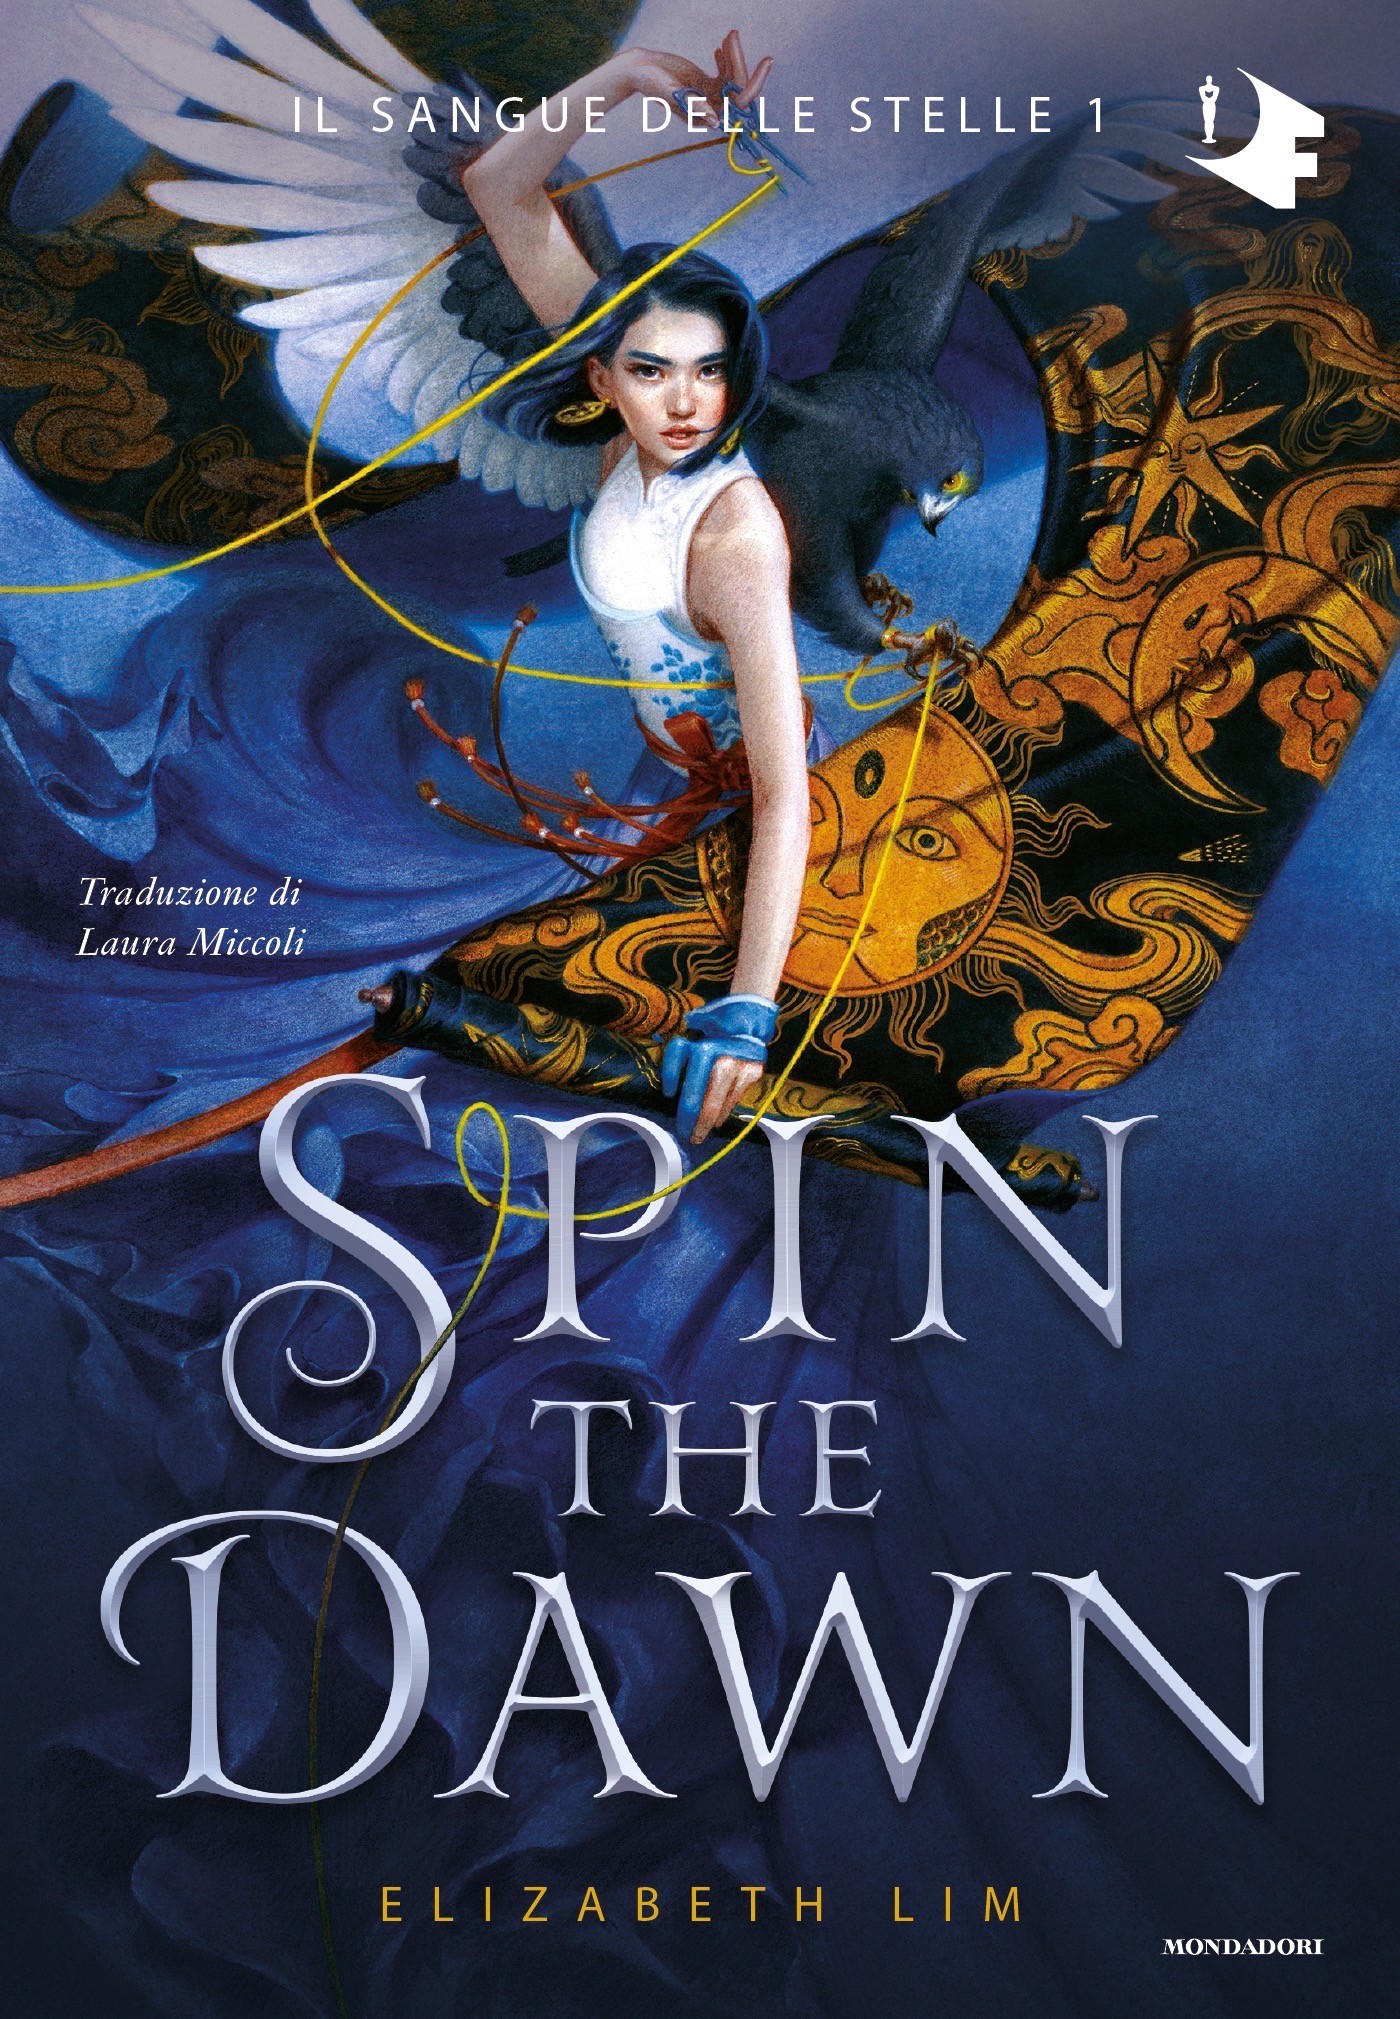 Spin the dawn - Librerie.coop